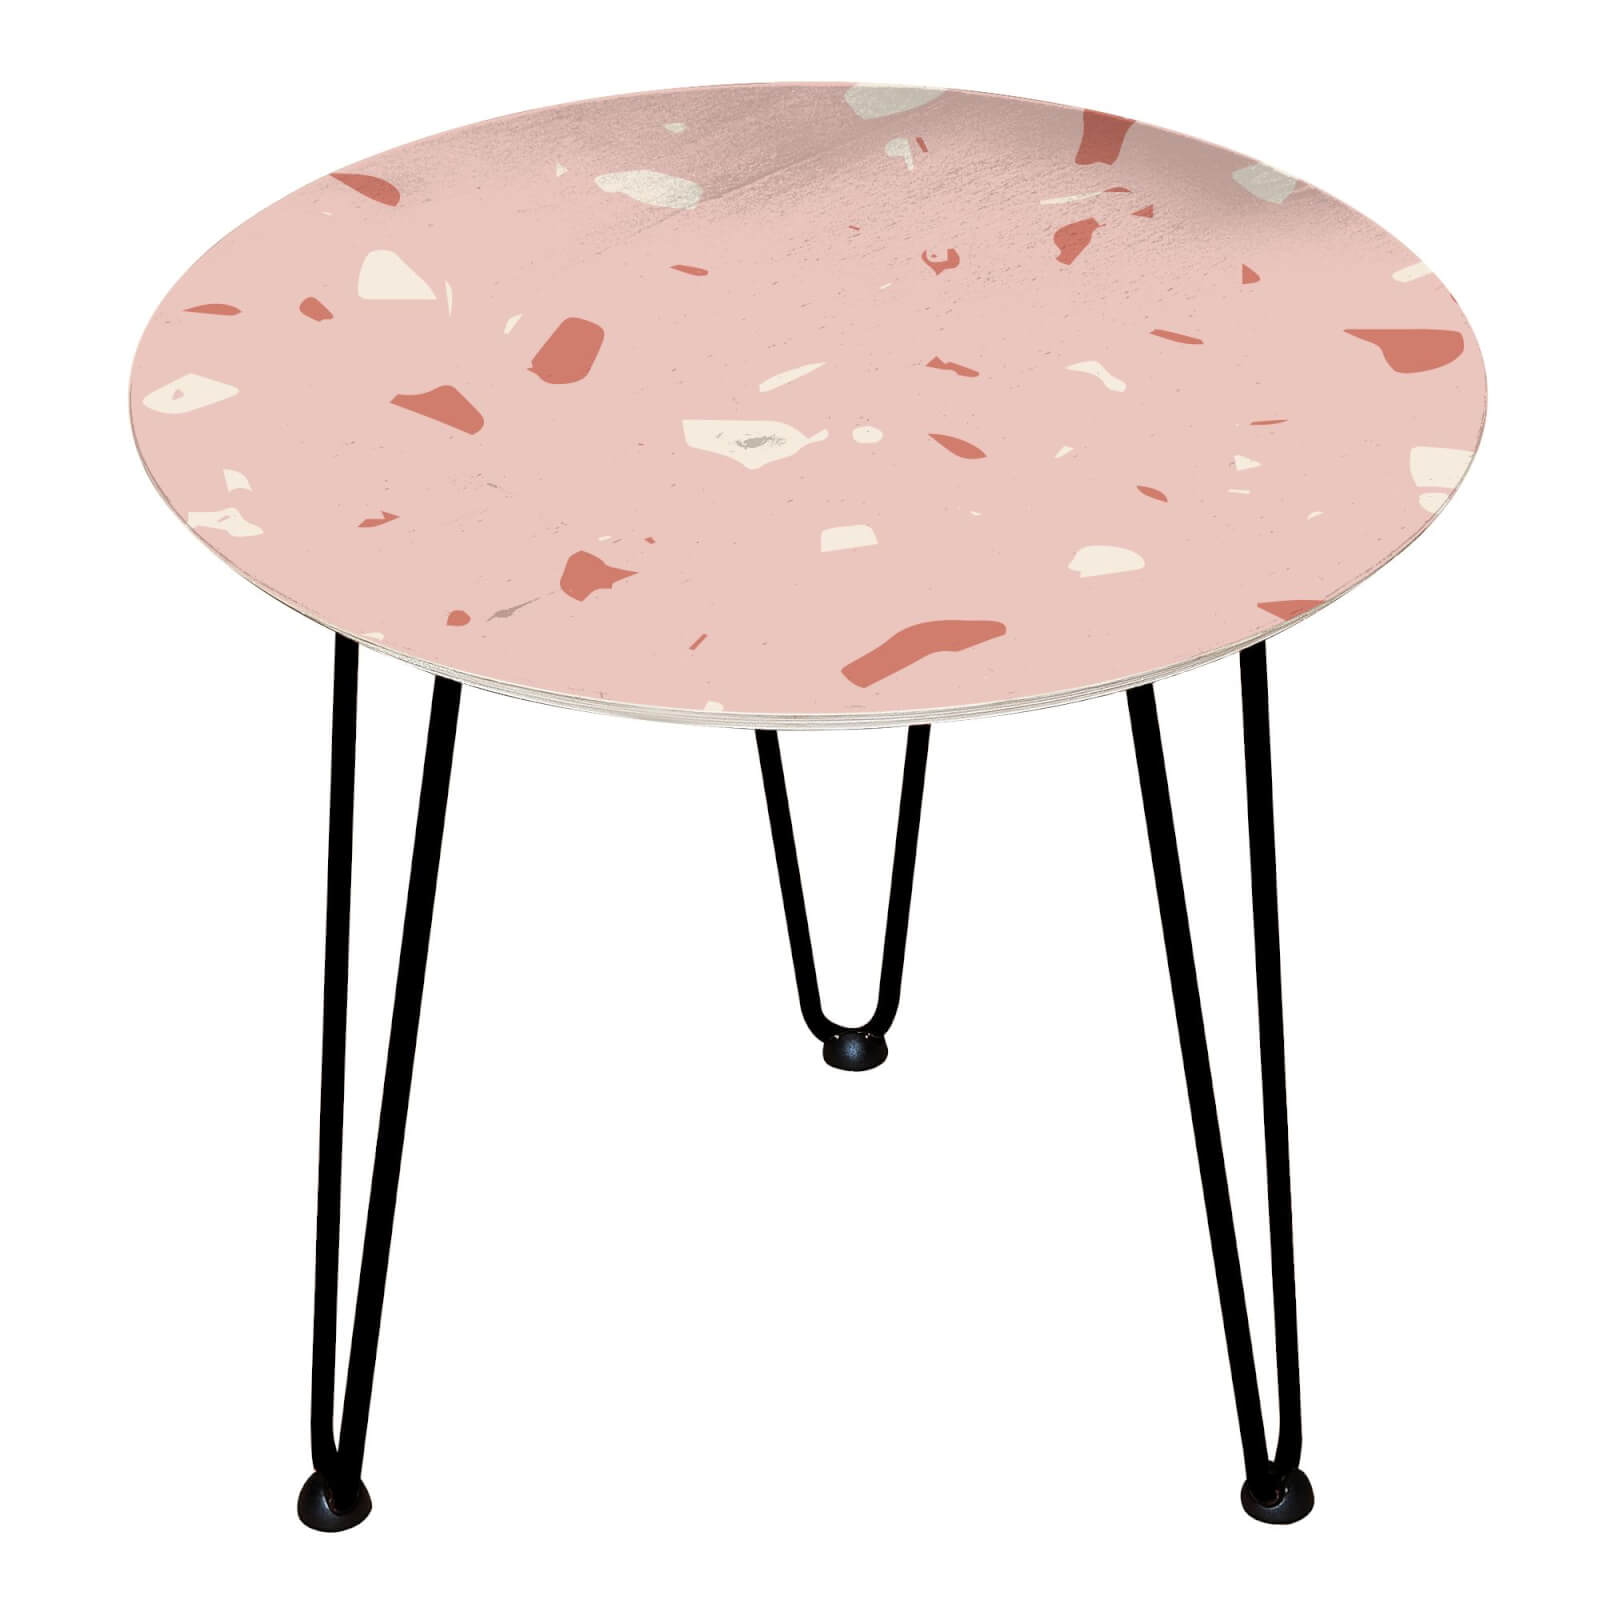 Decorsome - Pink Terrazzo Wooden Side Table - Black